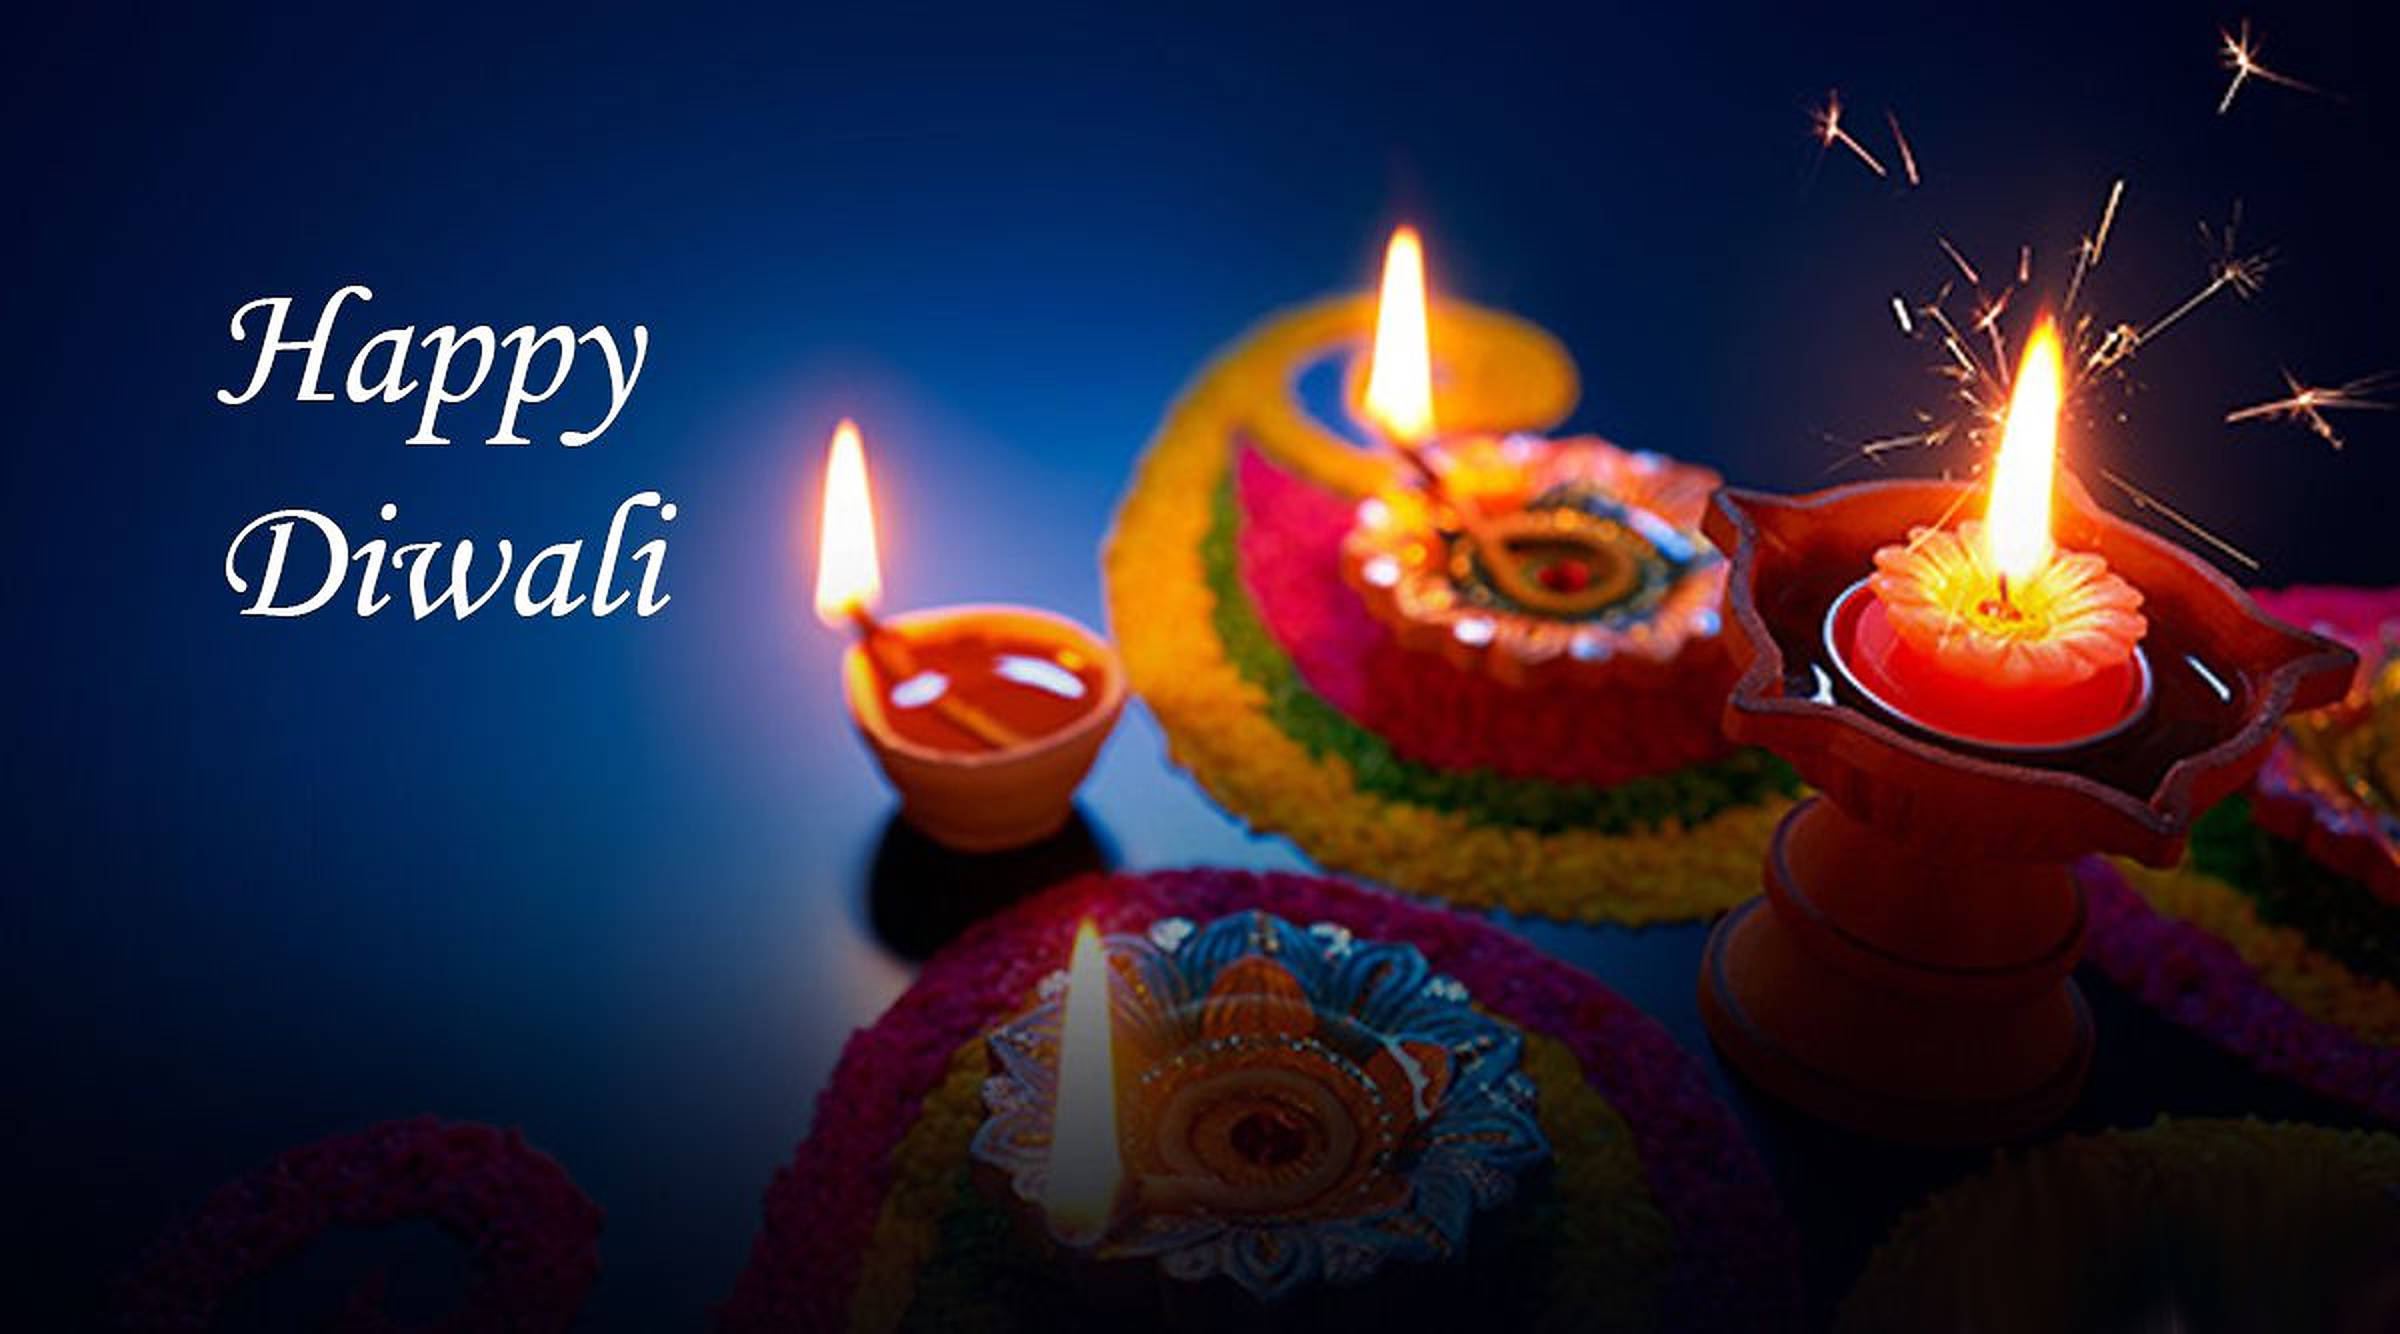 Splendid Diwali Poster Shows Colorful Decorations And Candles On The Side Of A Blue Background.